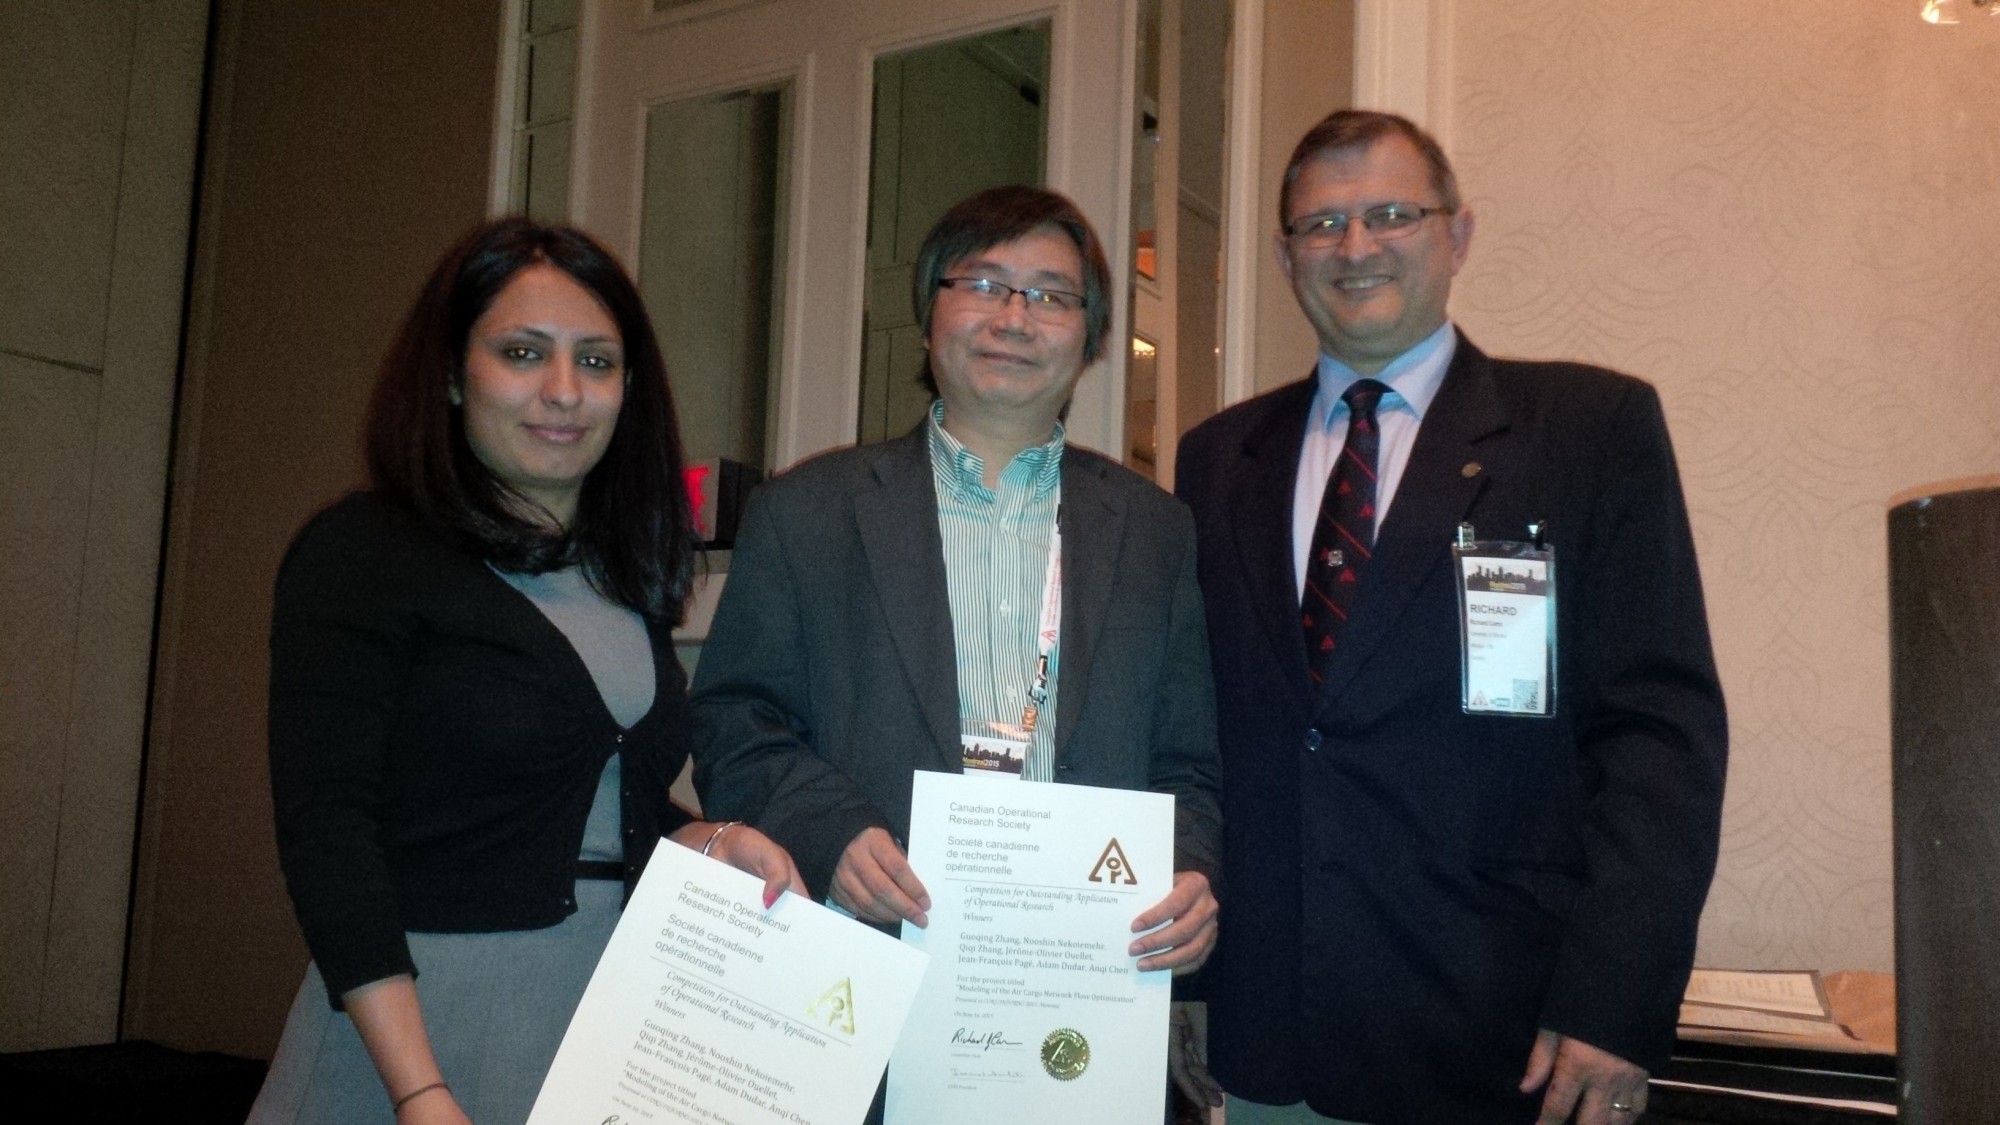 PhD student Nooshin Nekoiemehr and engineering professor Guoqing Zhang receiving their prize from the Canadian Operational Research Society.